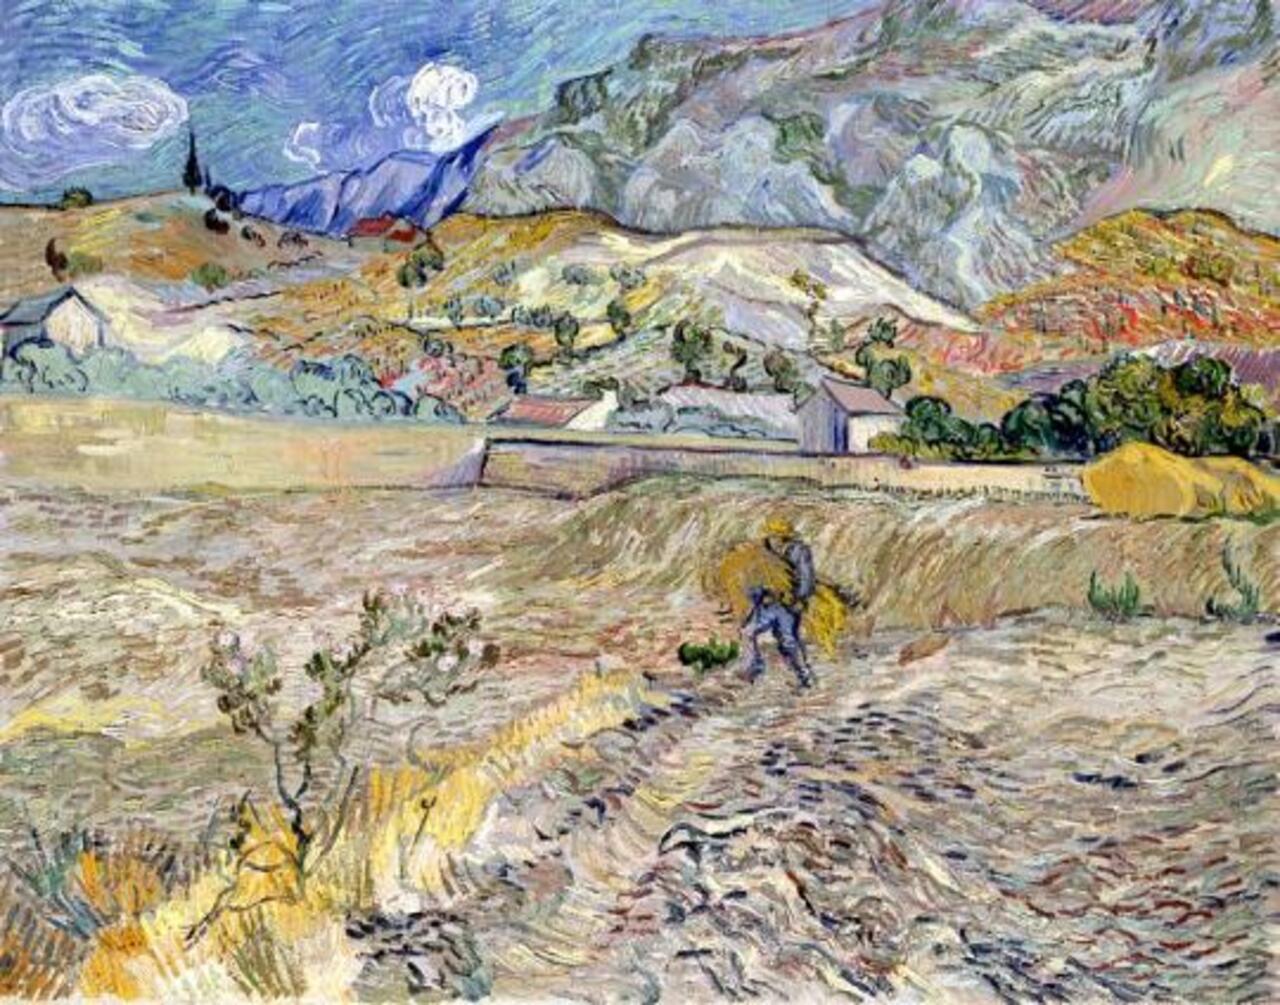 RT @leadintogold: Via "Life and art"
Vincent Van Gogh - Landscape at Saint-Remy (The Plouged Field) http://t.co/wHf03Mqb7y